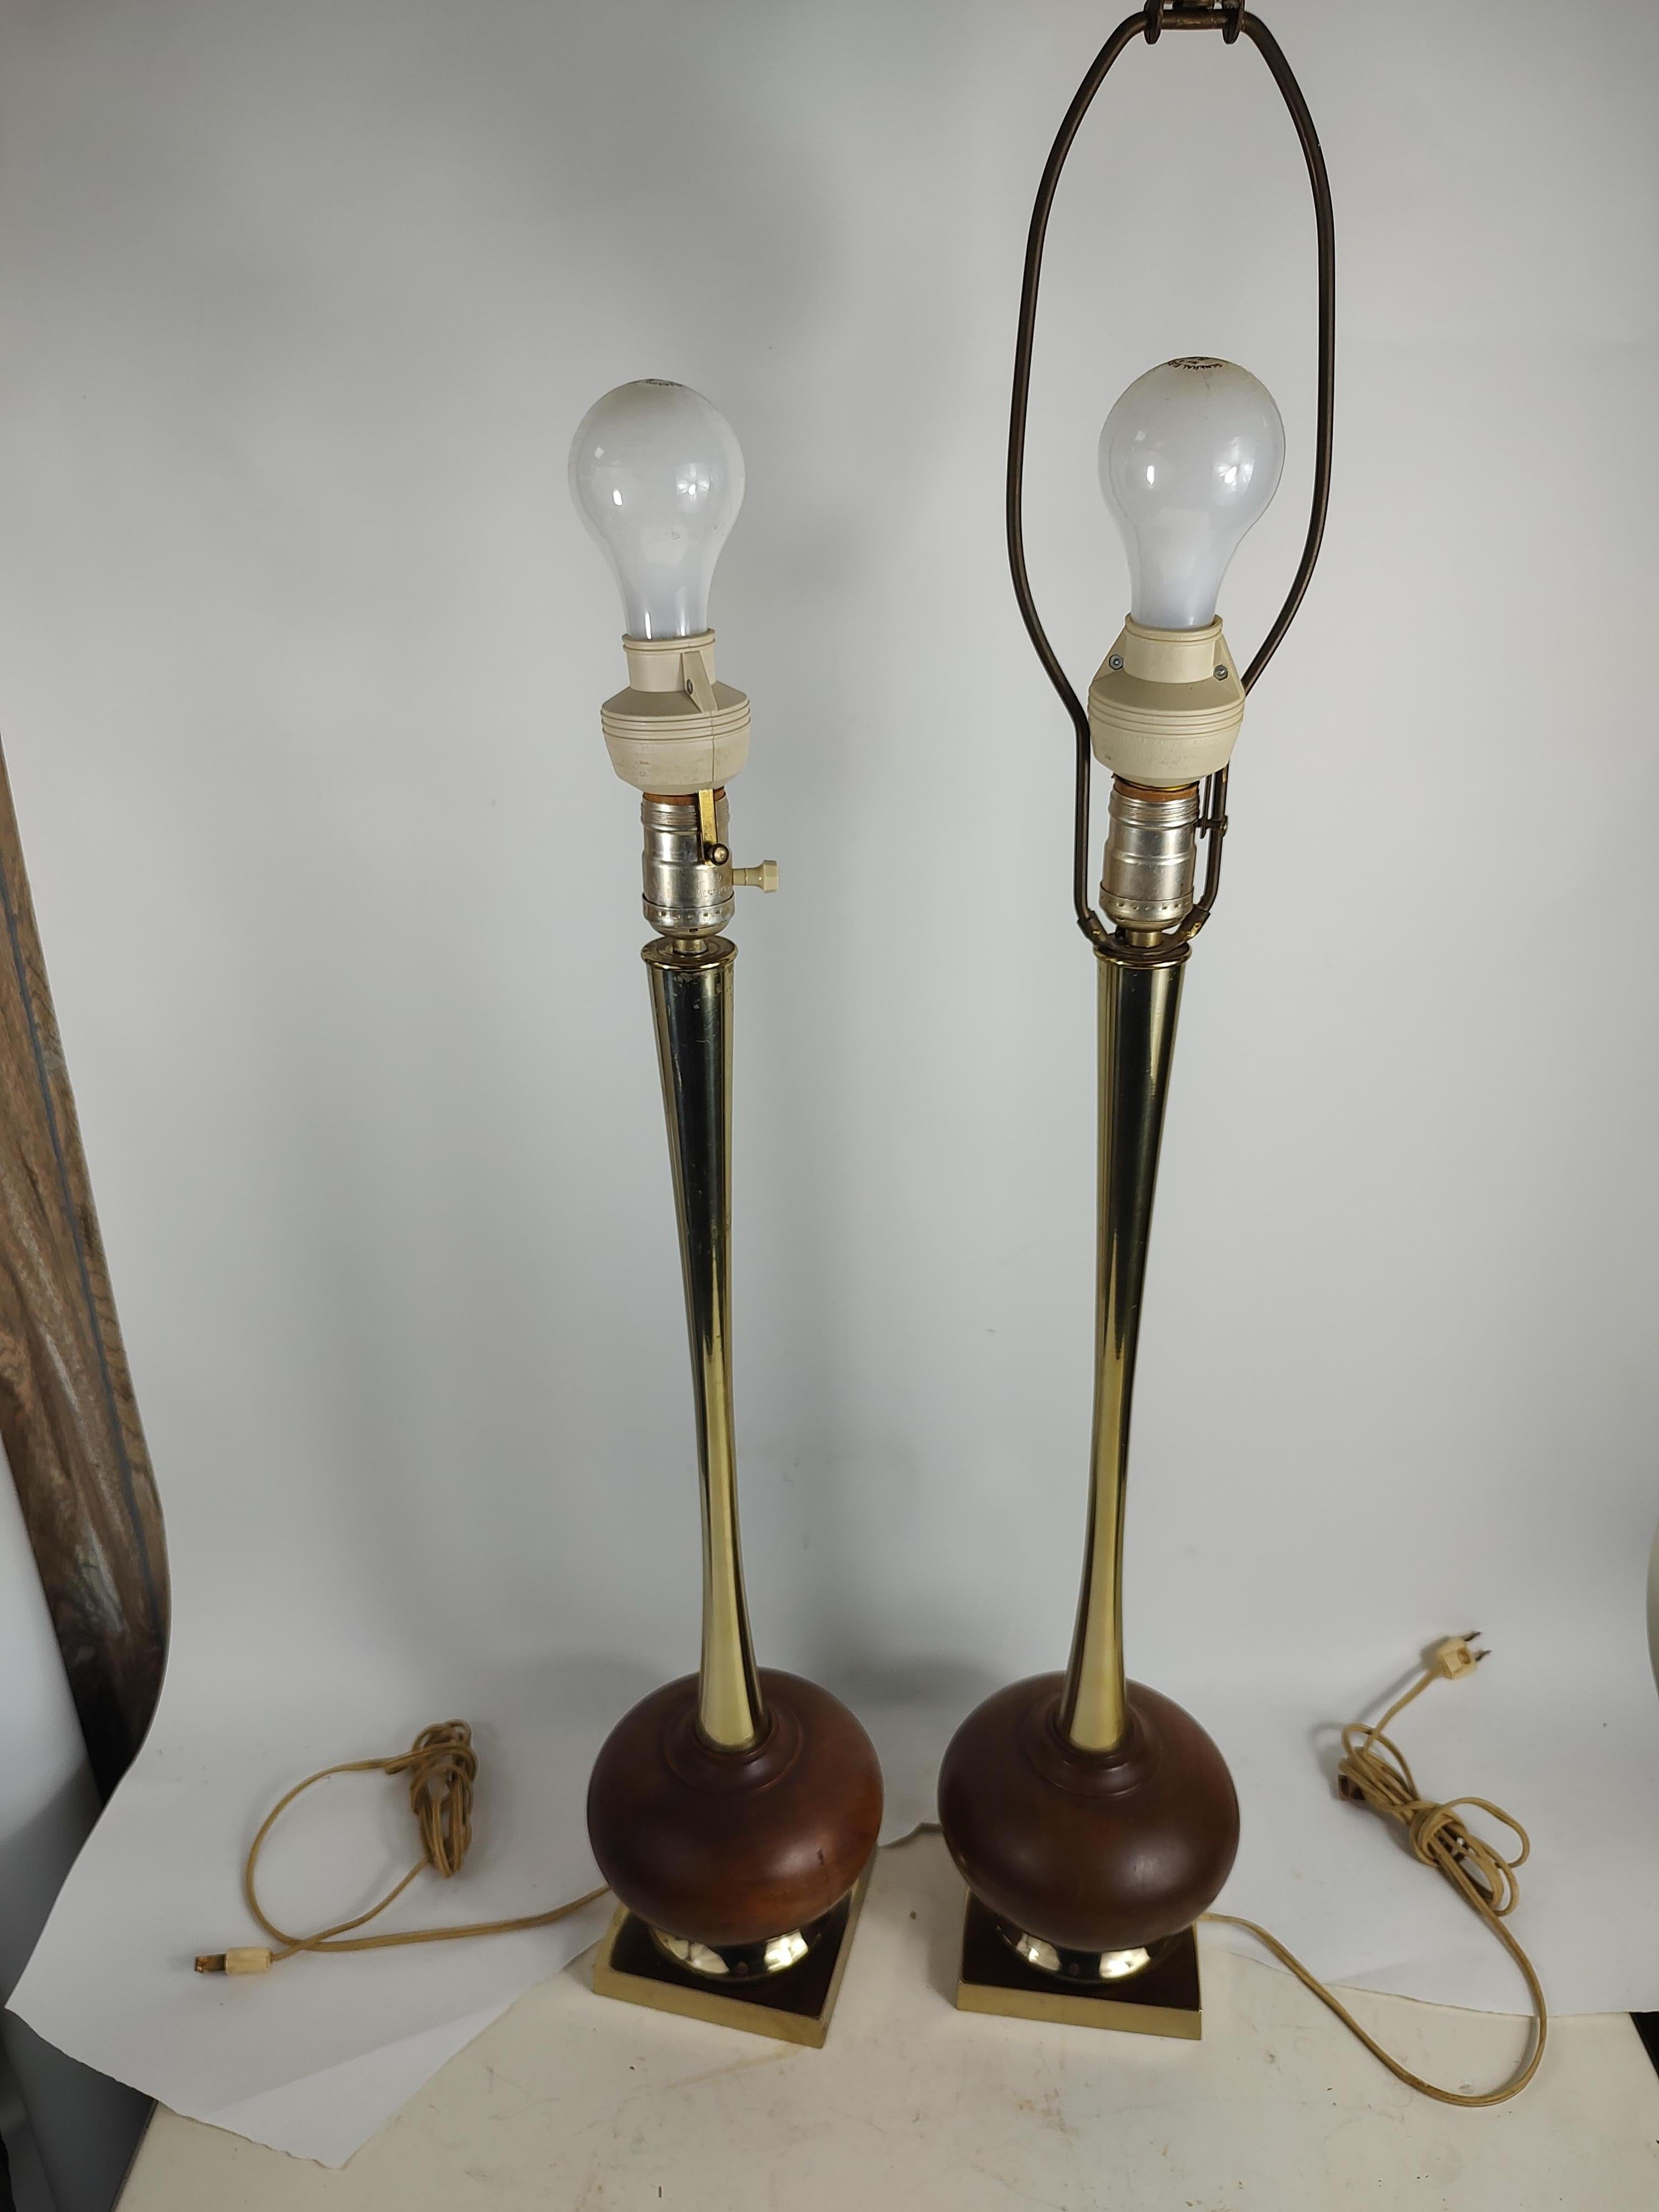 Fabulous pair of Mid-Century Modern Sculptural table lamps attributed to the Laurel Lamp Co. Tall slender necks supported by a squat walnut ball. In excellent vintage condition with minimal wear. Both lamps have touch sensors installed. Touch stems